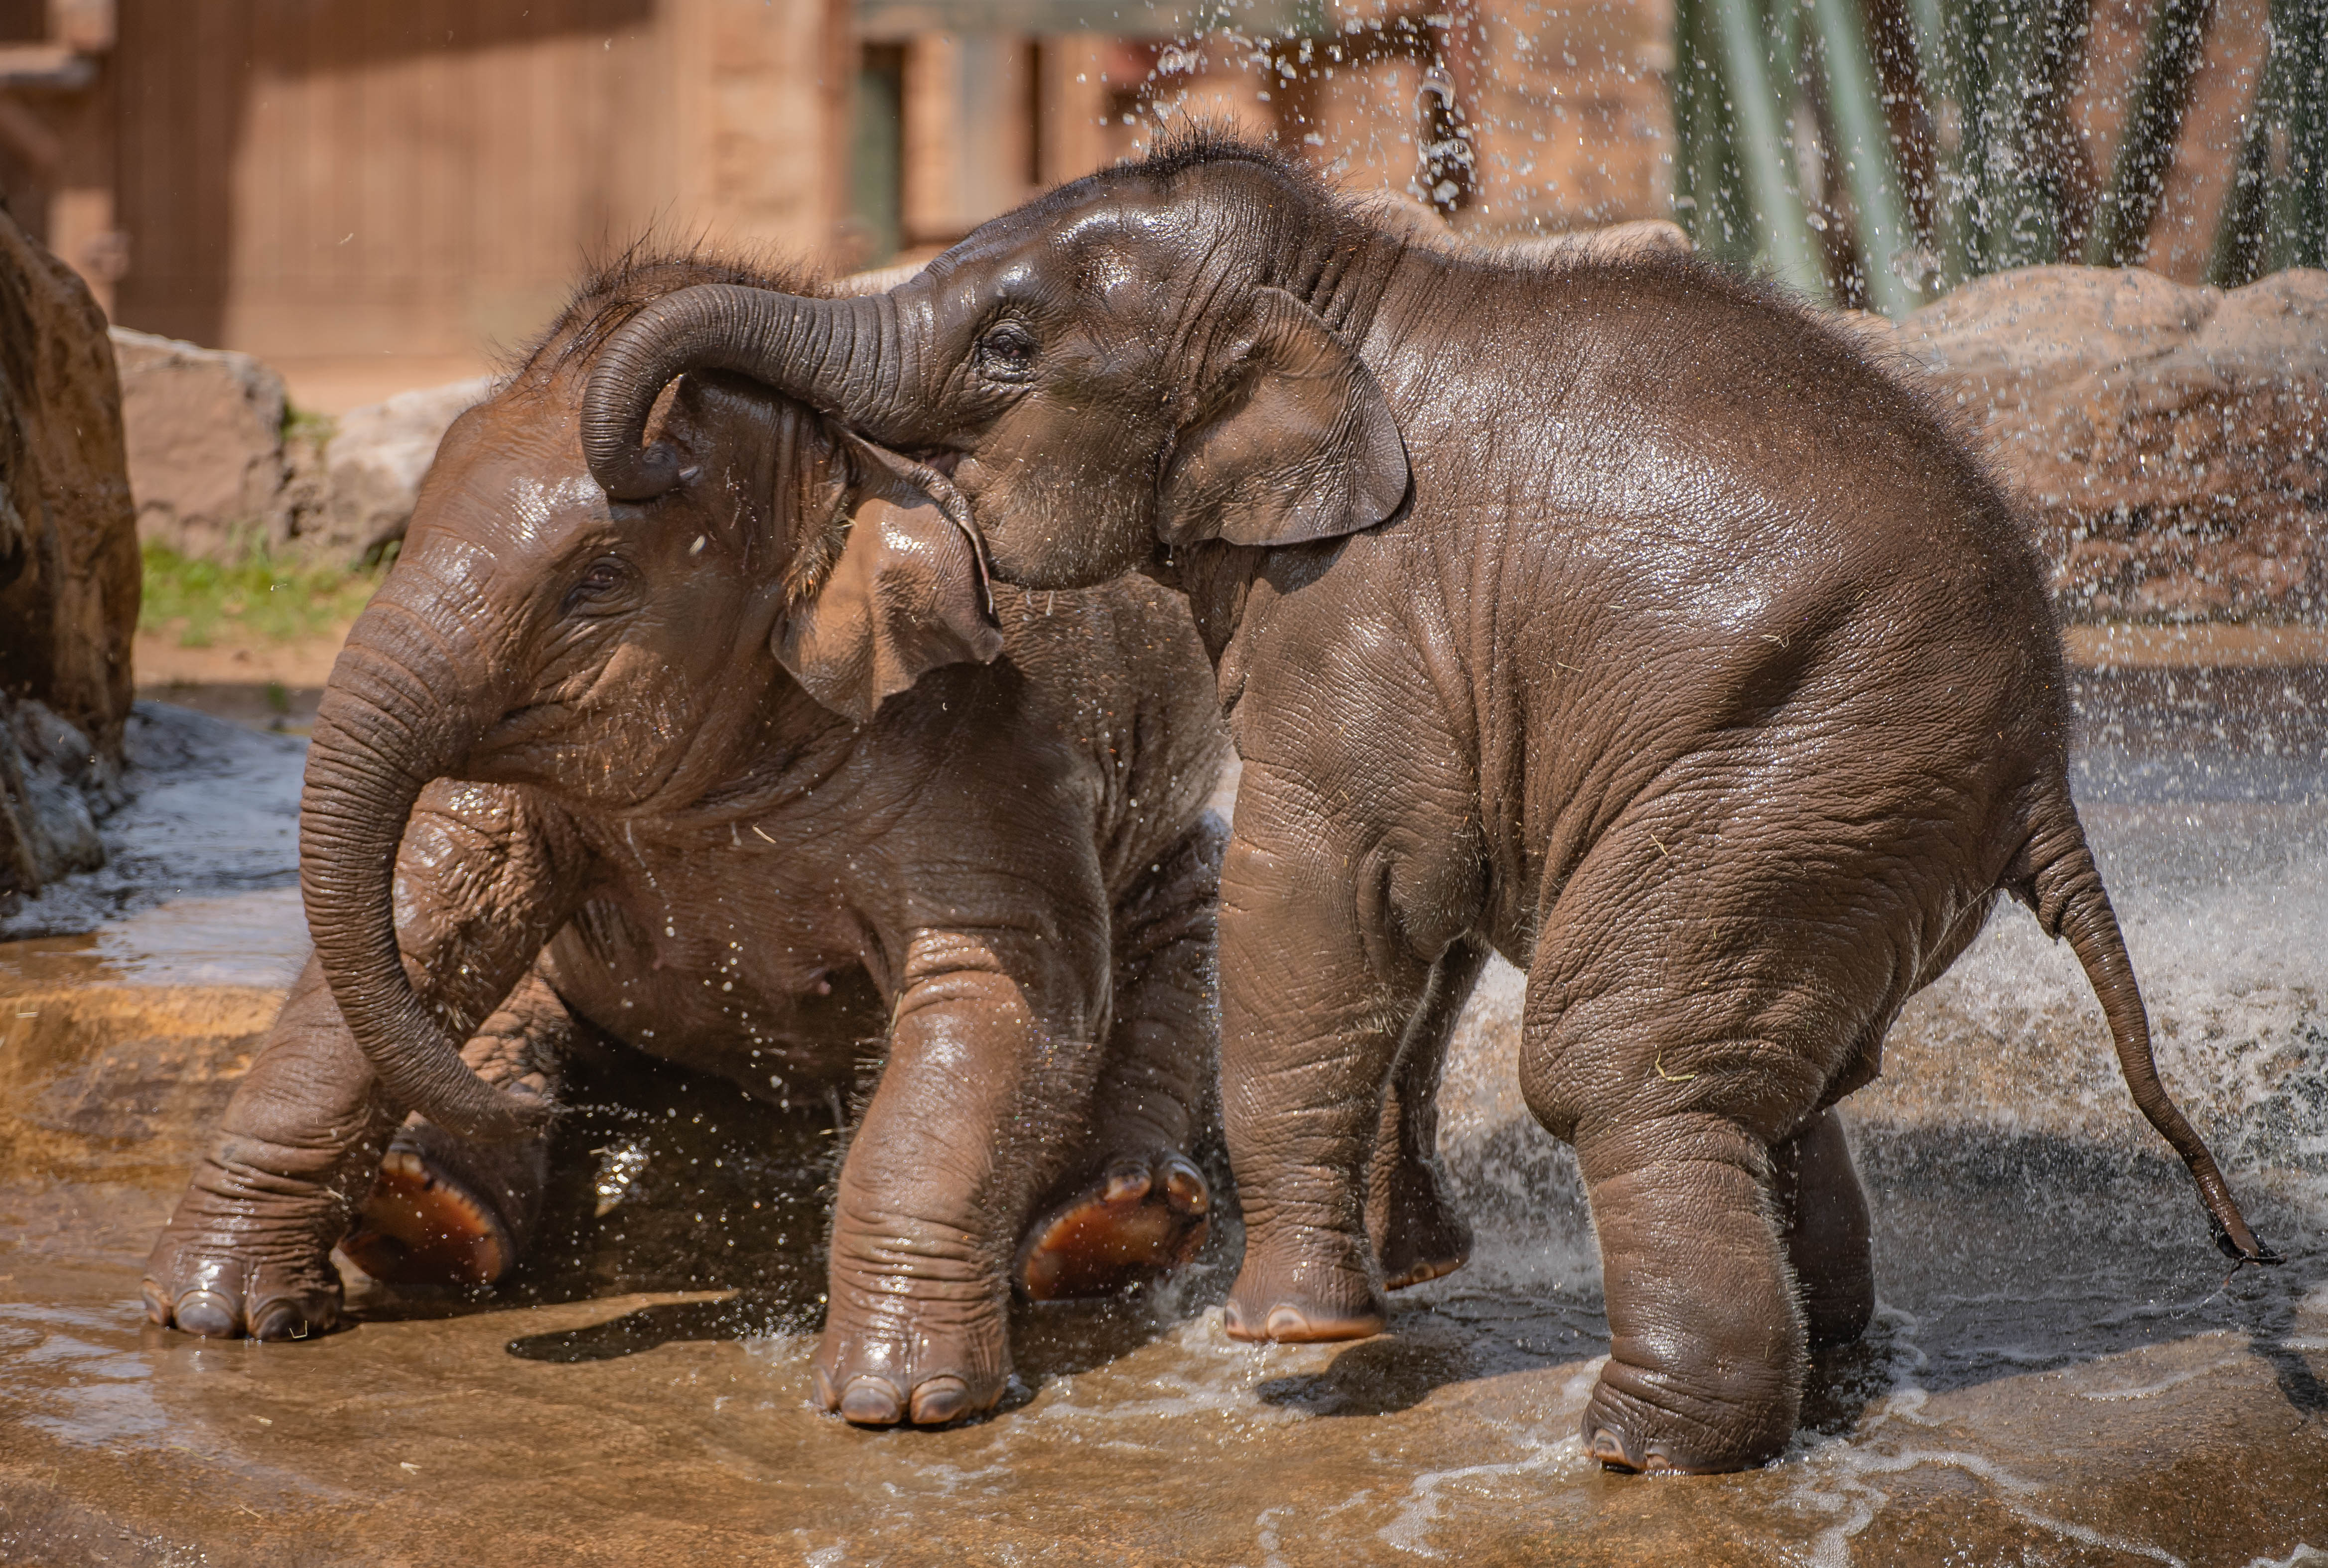 Elephants playing in water